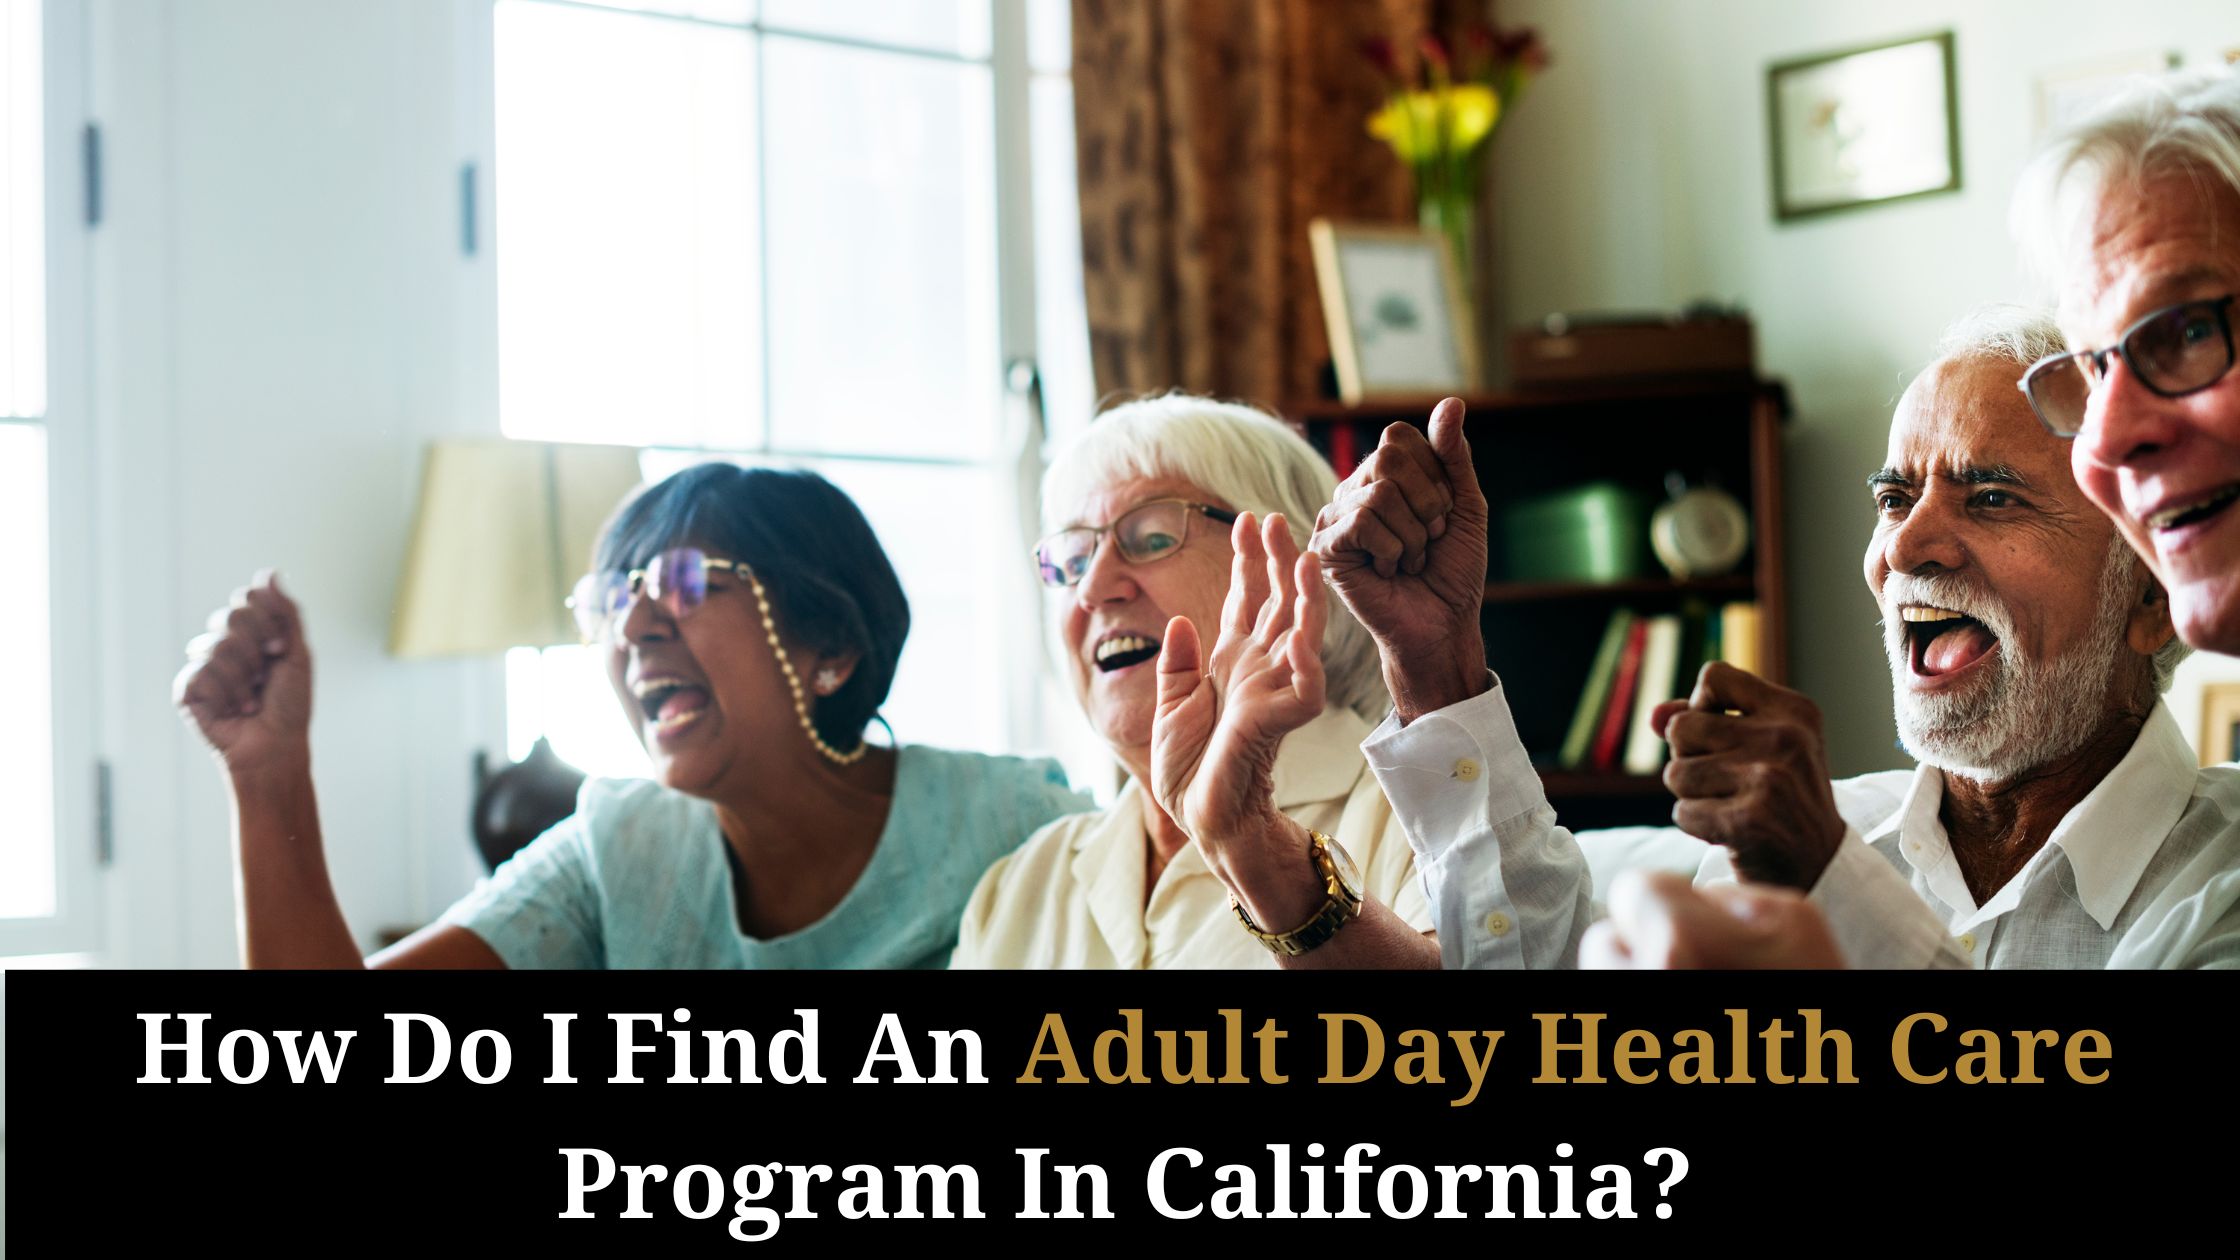 How Do I Find An Adult Day Health Care Program In California?